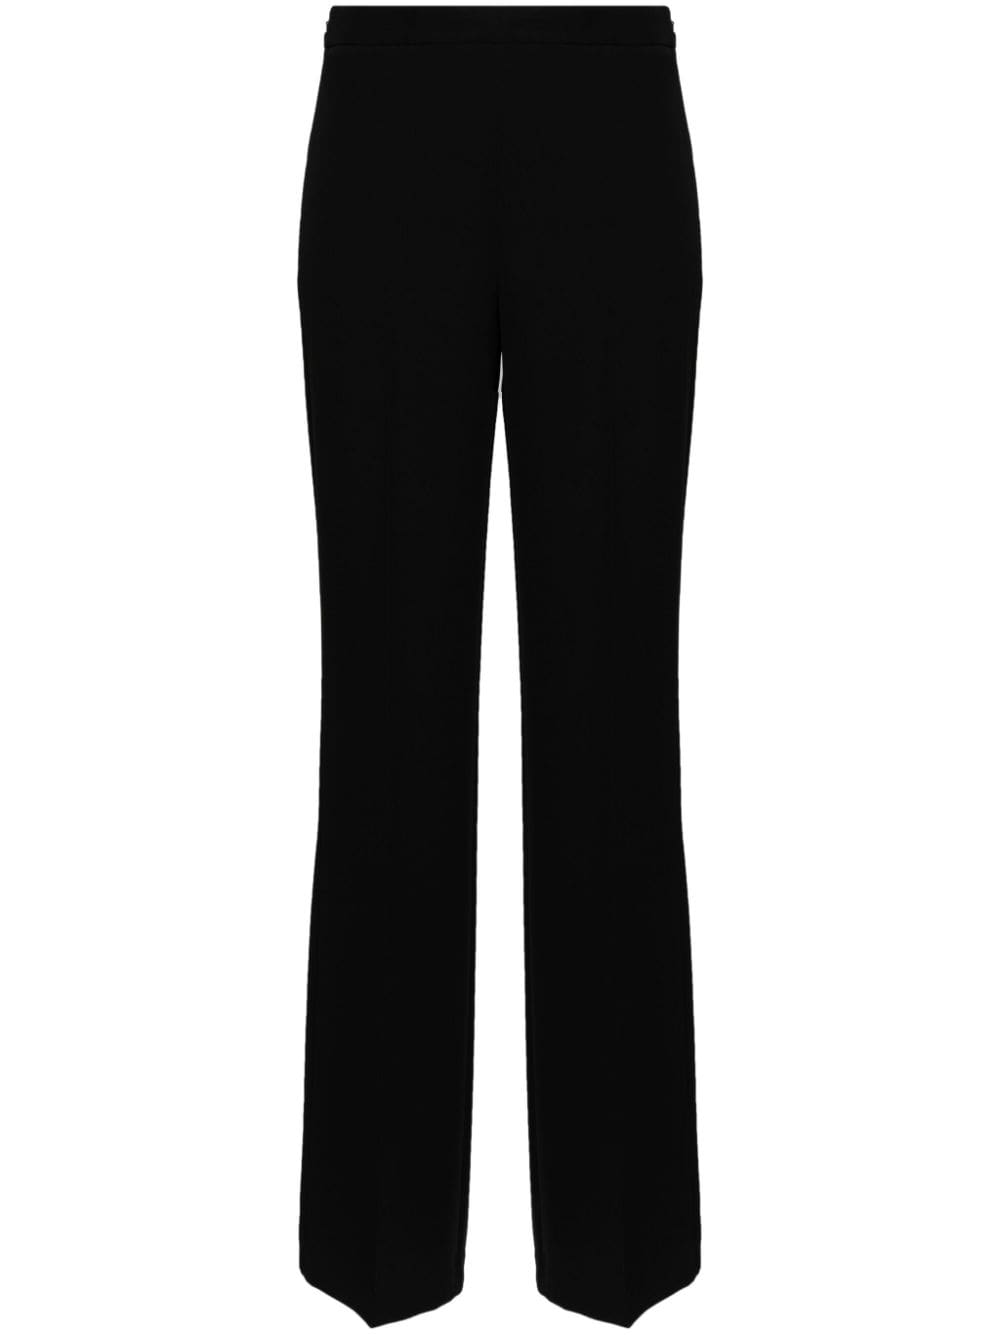 TWINSET straight tailored trousers - Black von TWINSET